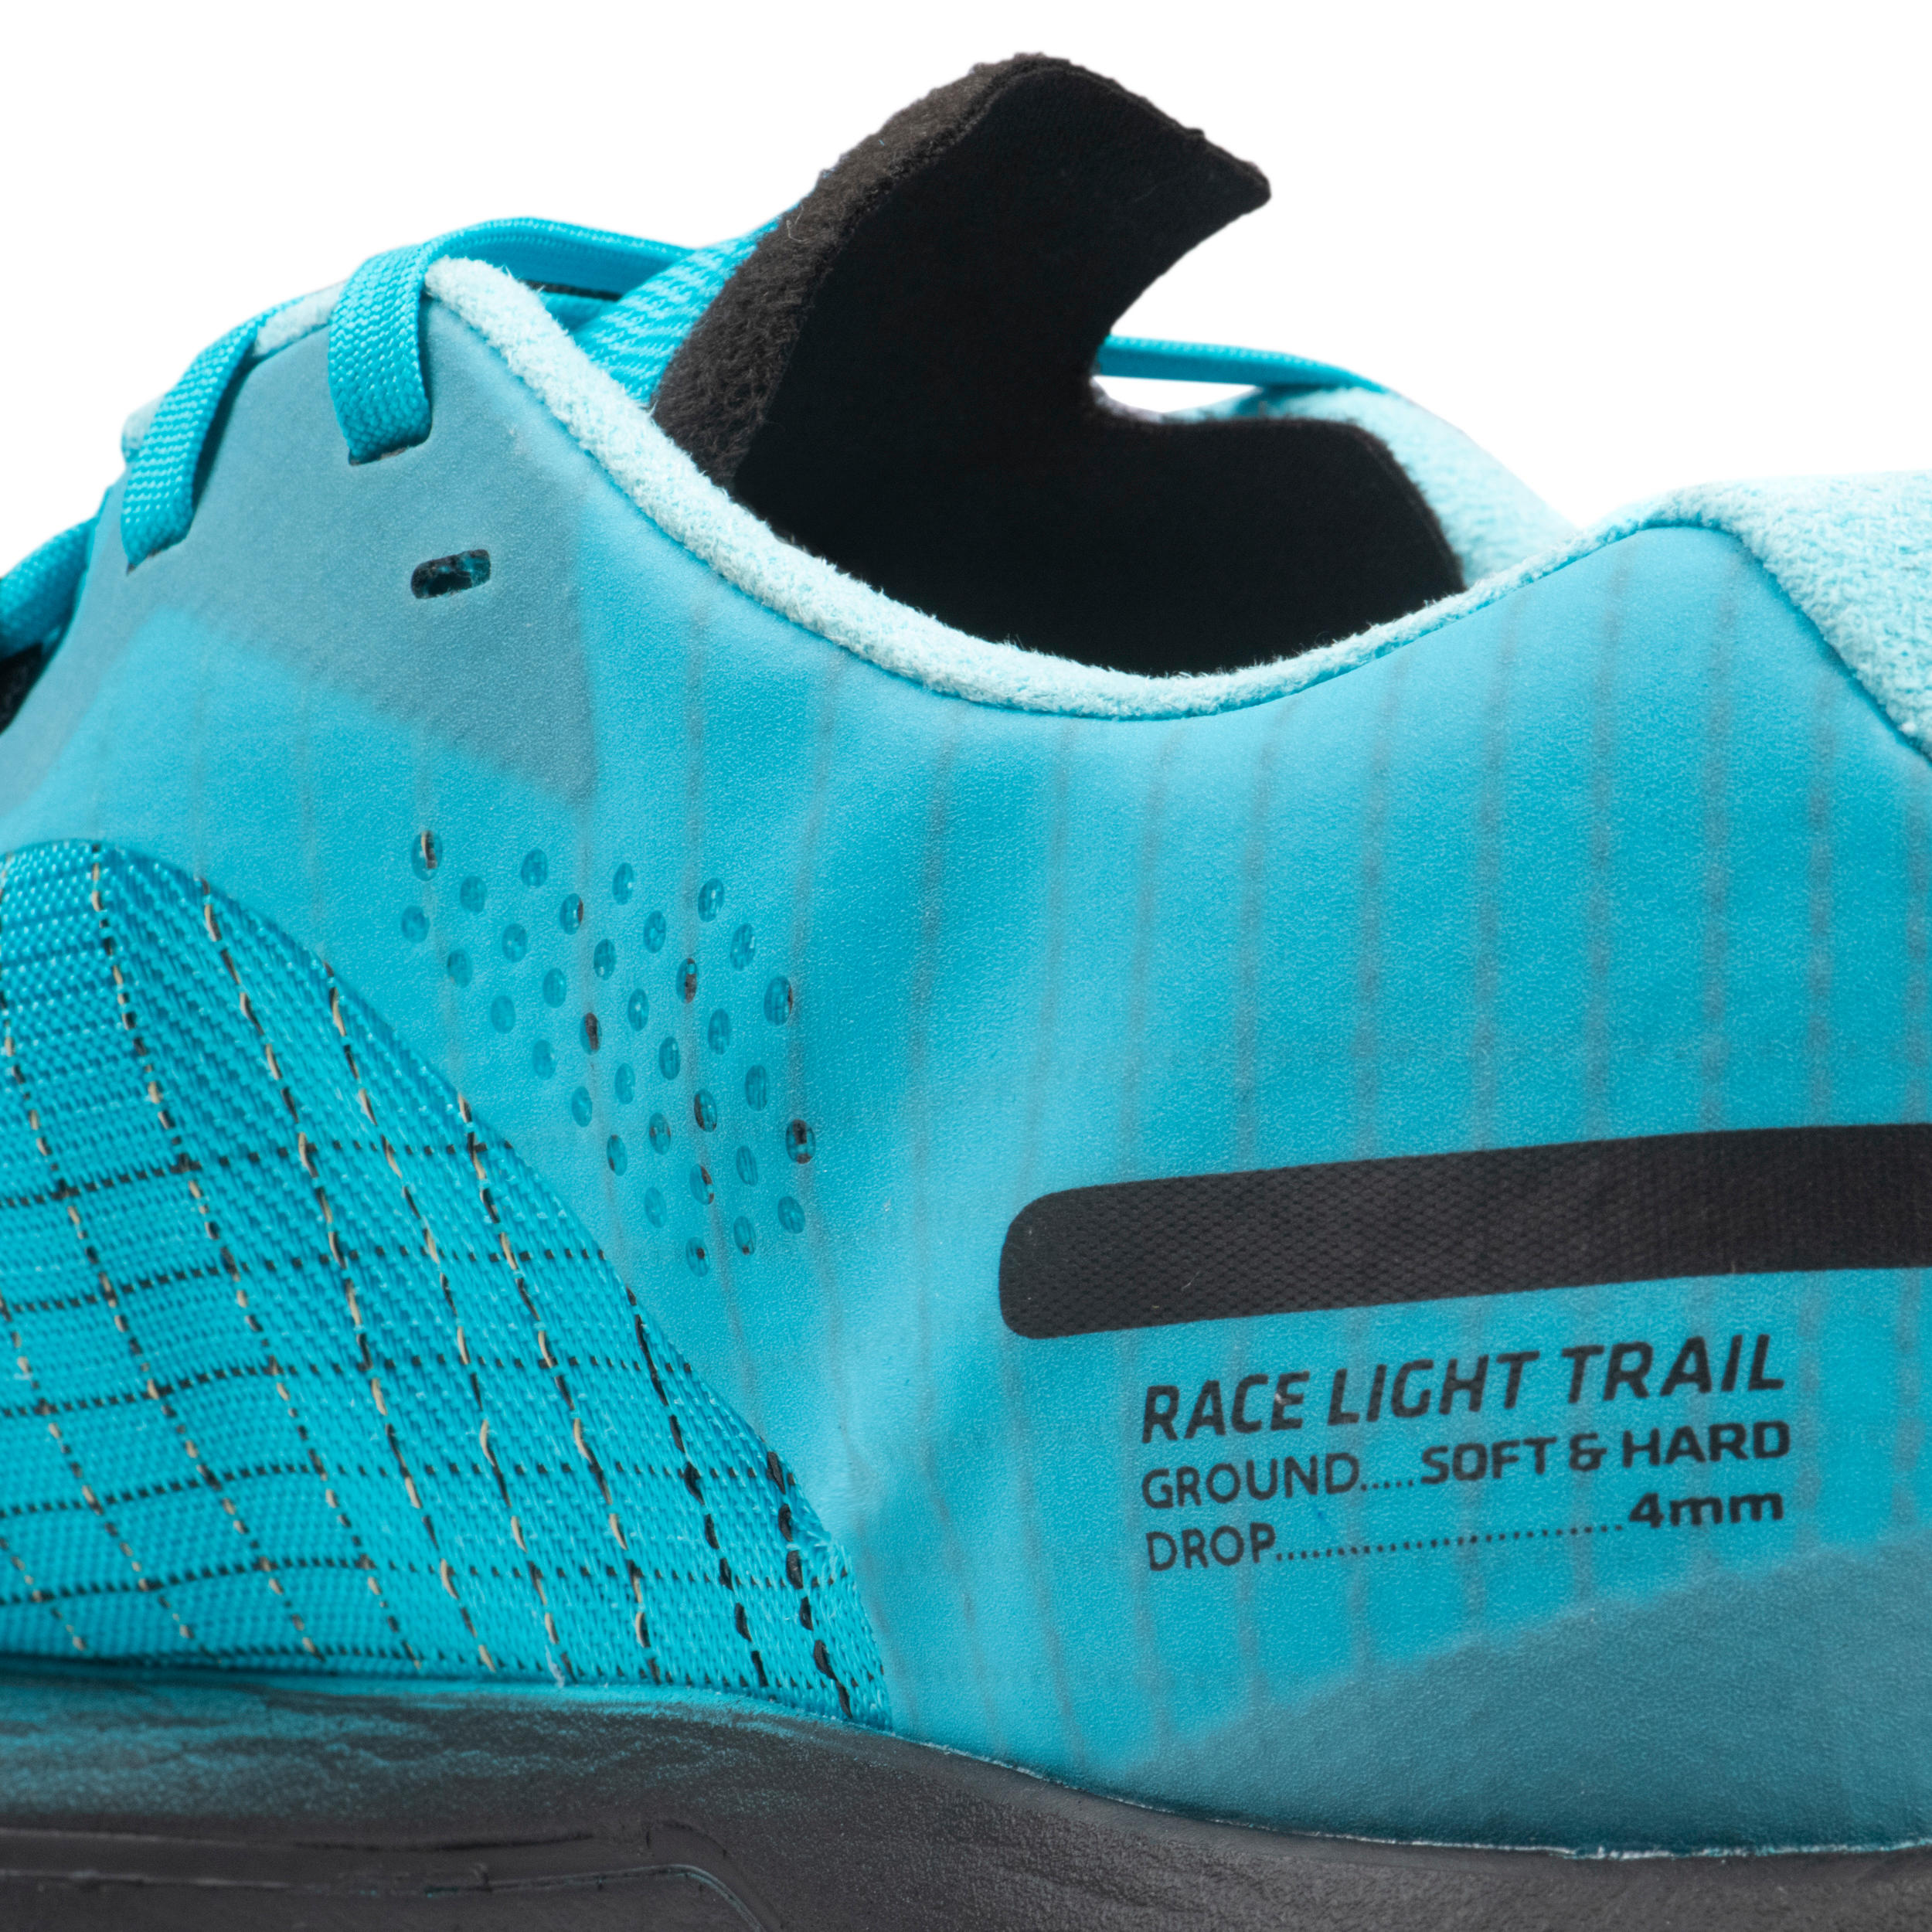 Race Light Men's Trail Running Shoes - sky blue and black 11/14